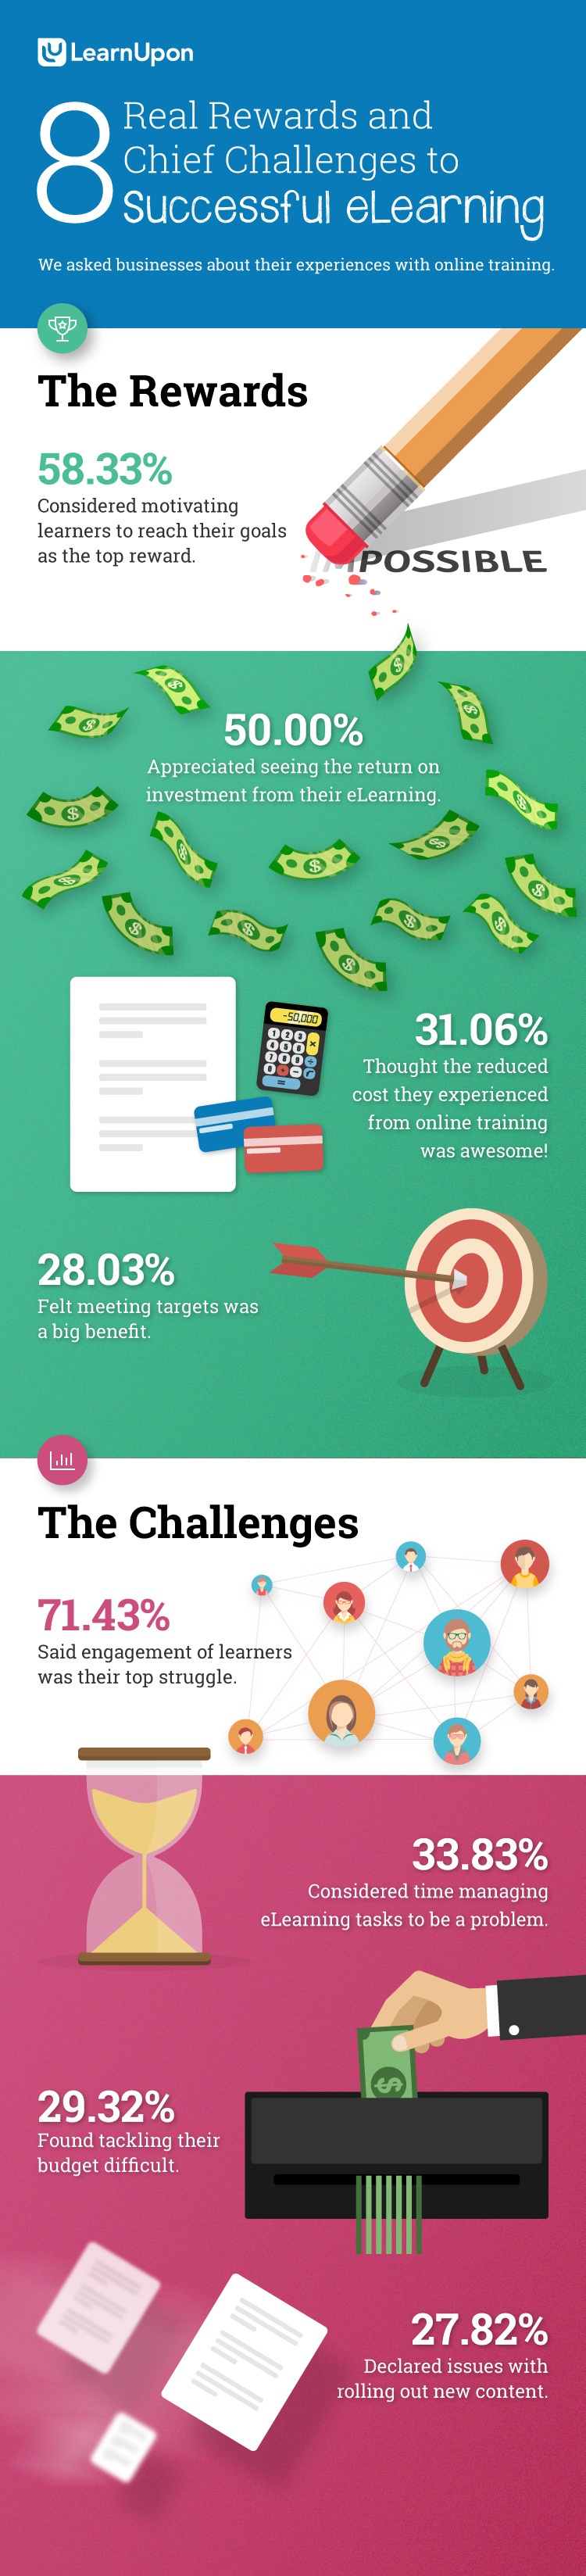 Real Rewards and Challenges to Successful eLearning Infographic